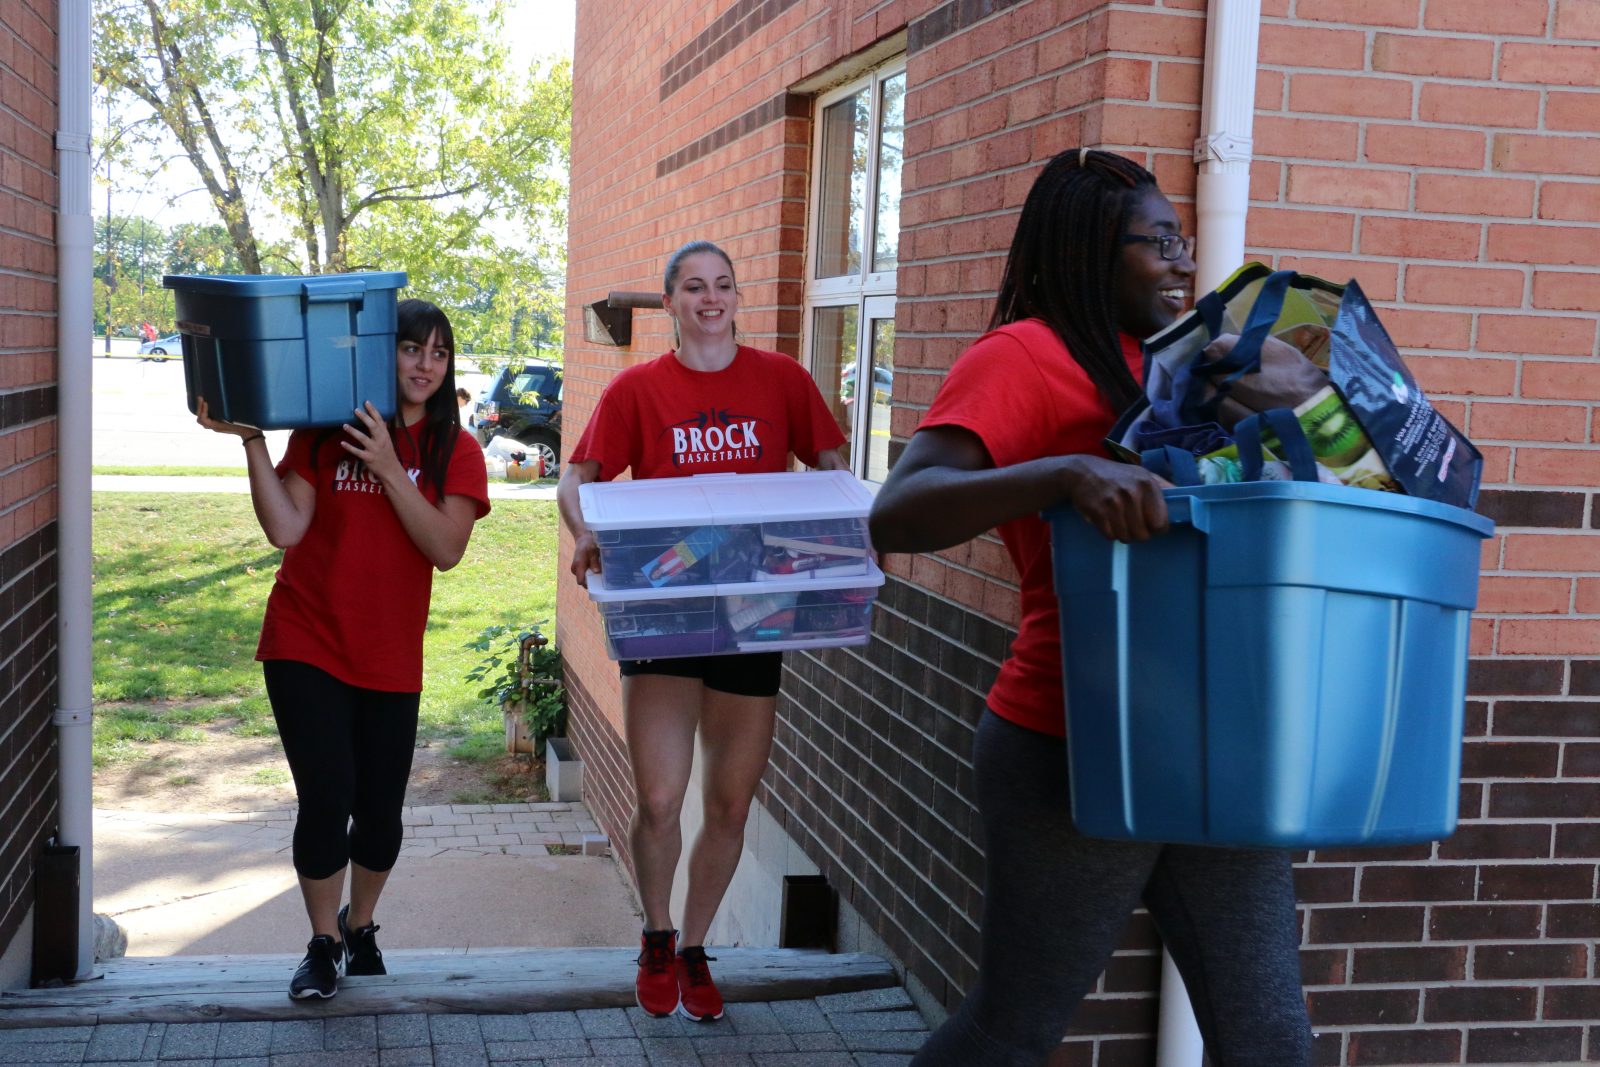 Brock University volunteers help out during Move In Day.